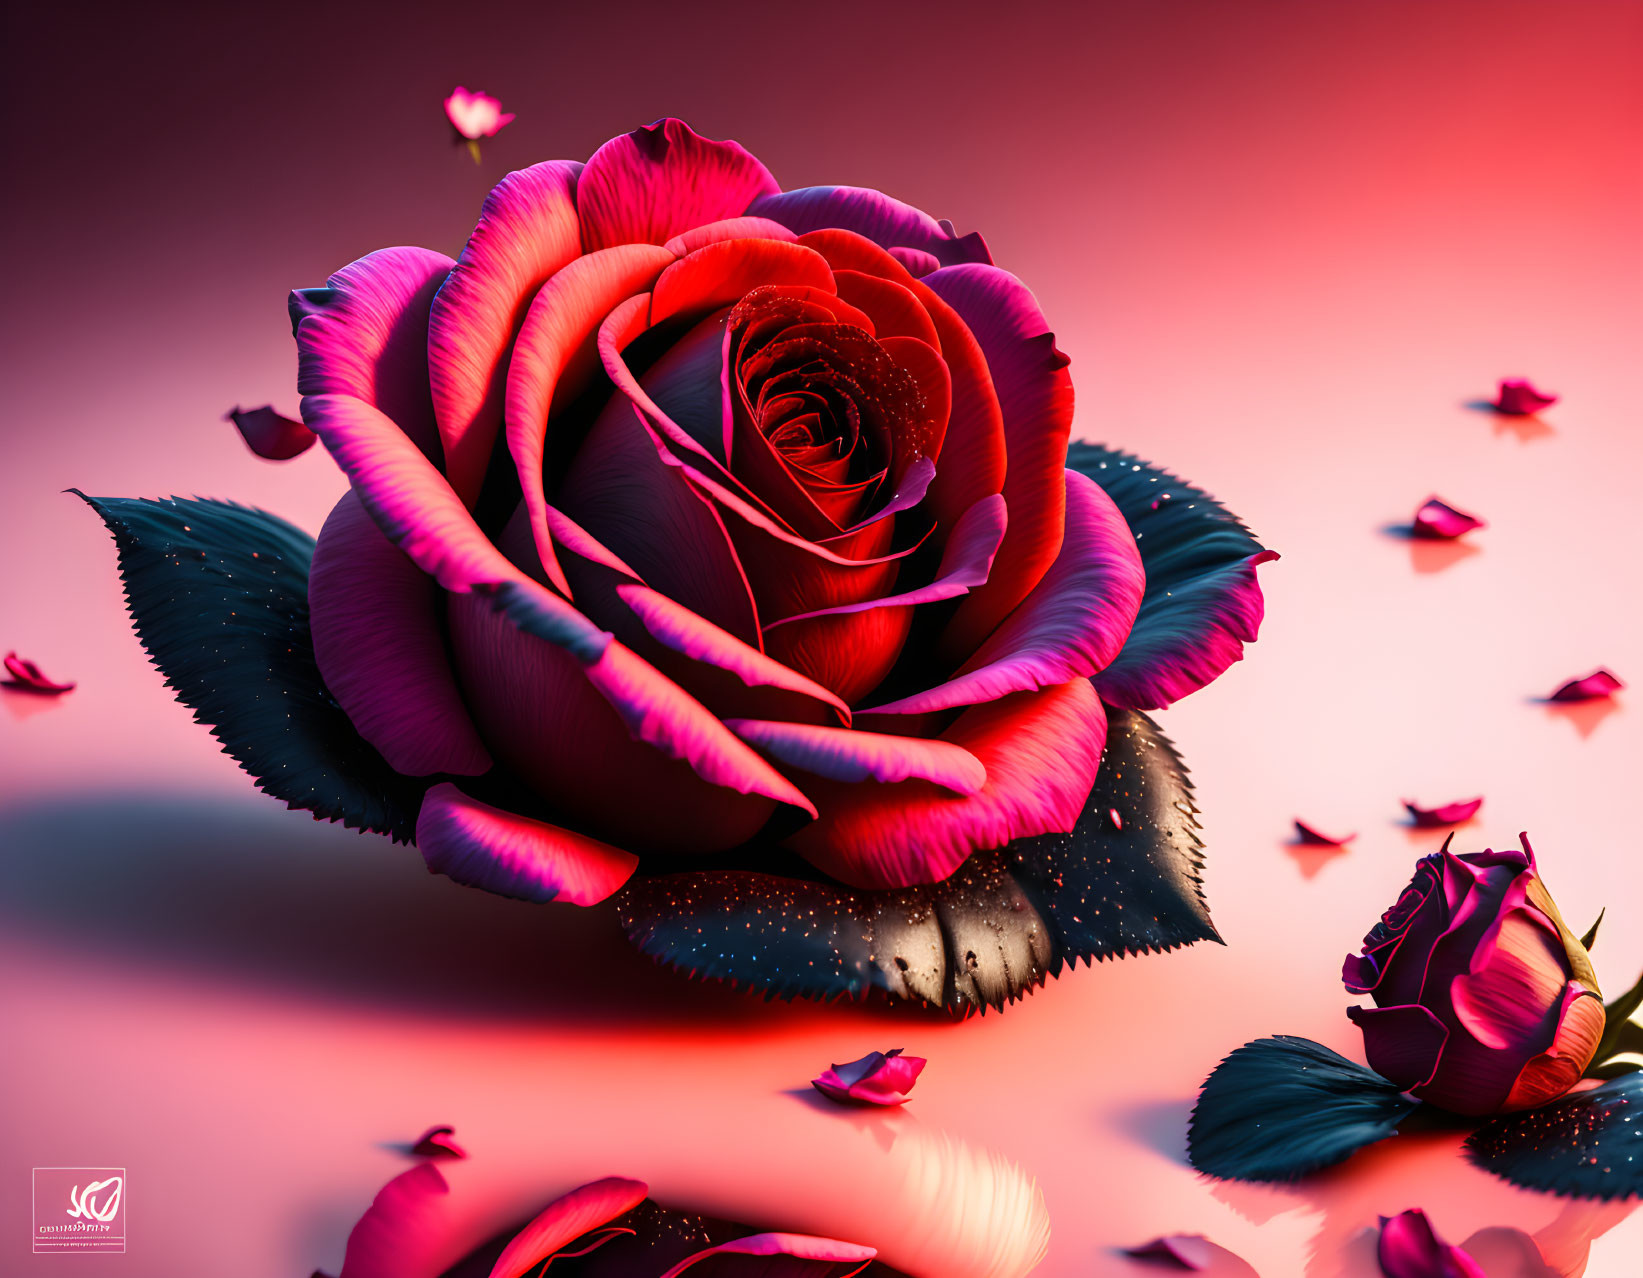 Vibrant purple and red rose on moody background